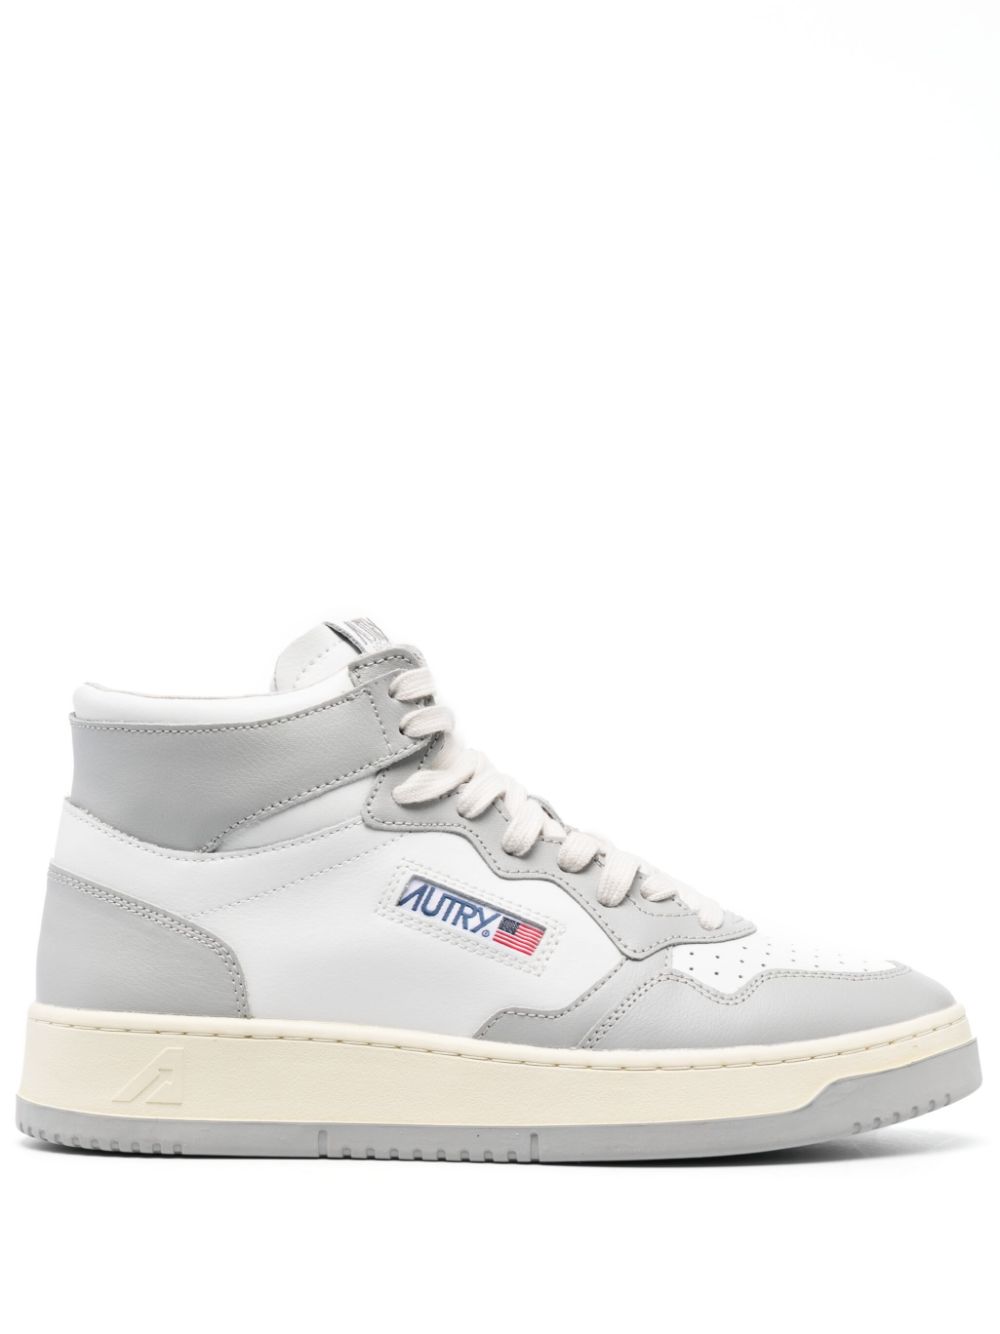 AUTRY MEDALIST HIGH-TOP LEATHER SNEAKERS